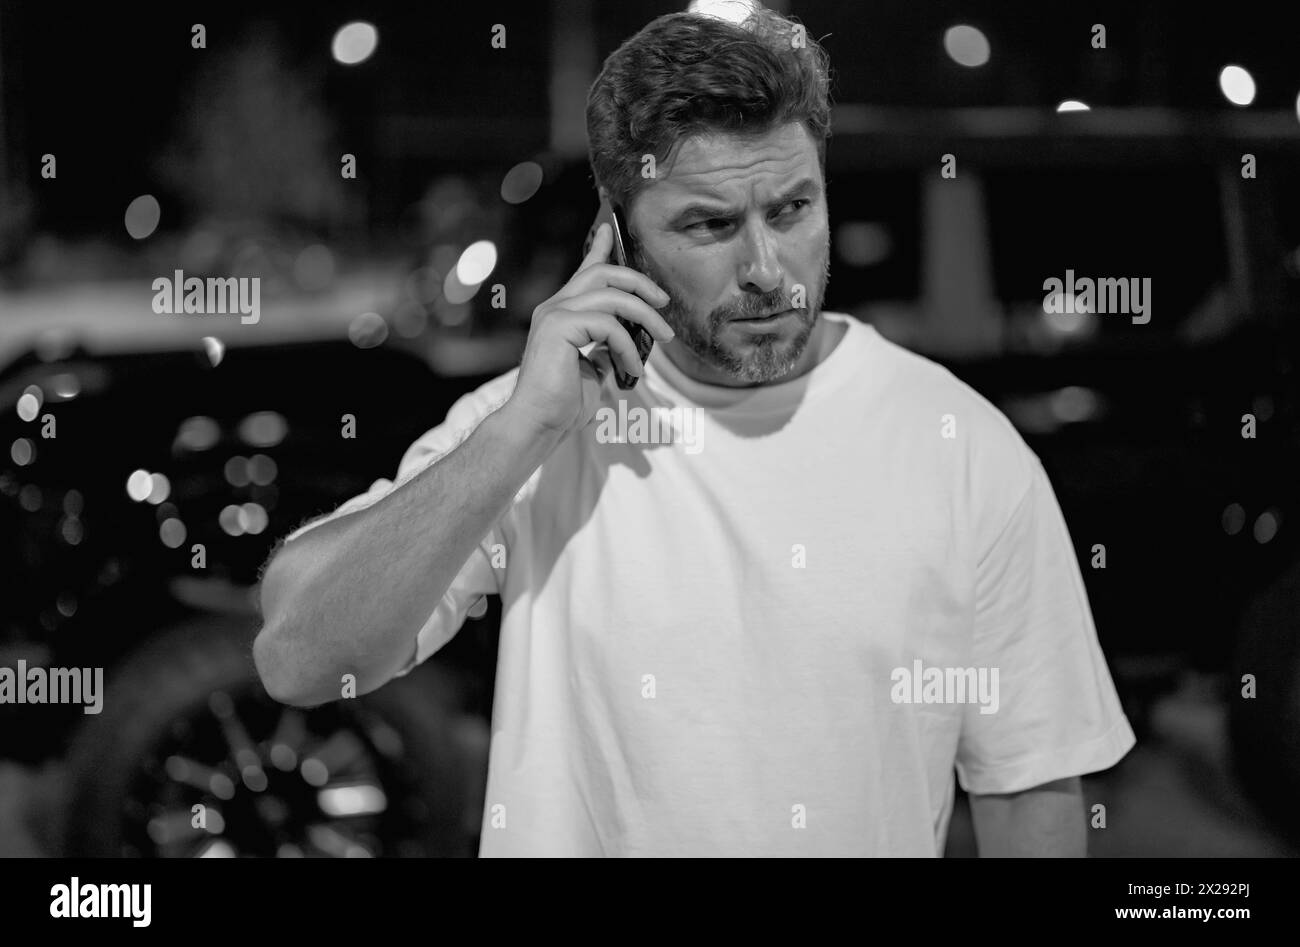 Angry man talking on phone on night urban street. Dangerous aggressive man talking on phone with serious face. Criminal city danger district Stock Photo